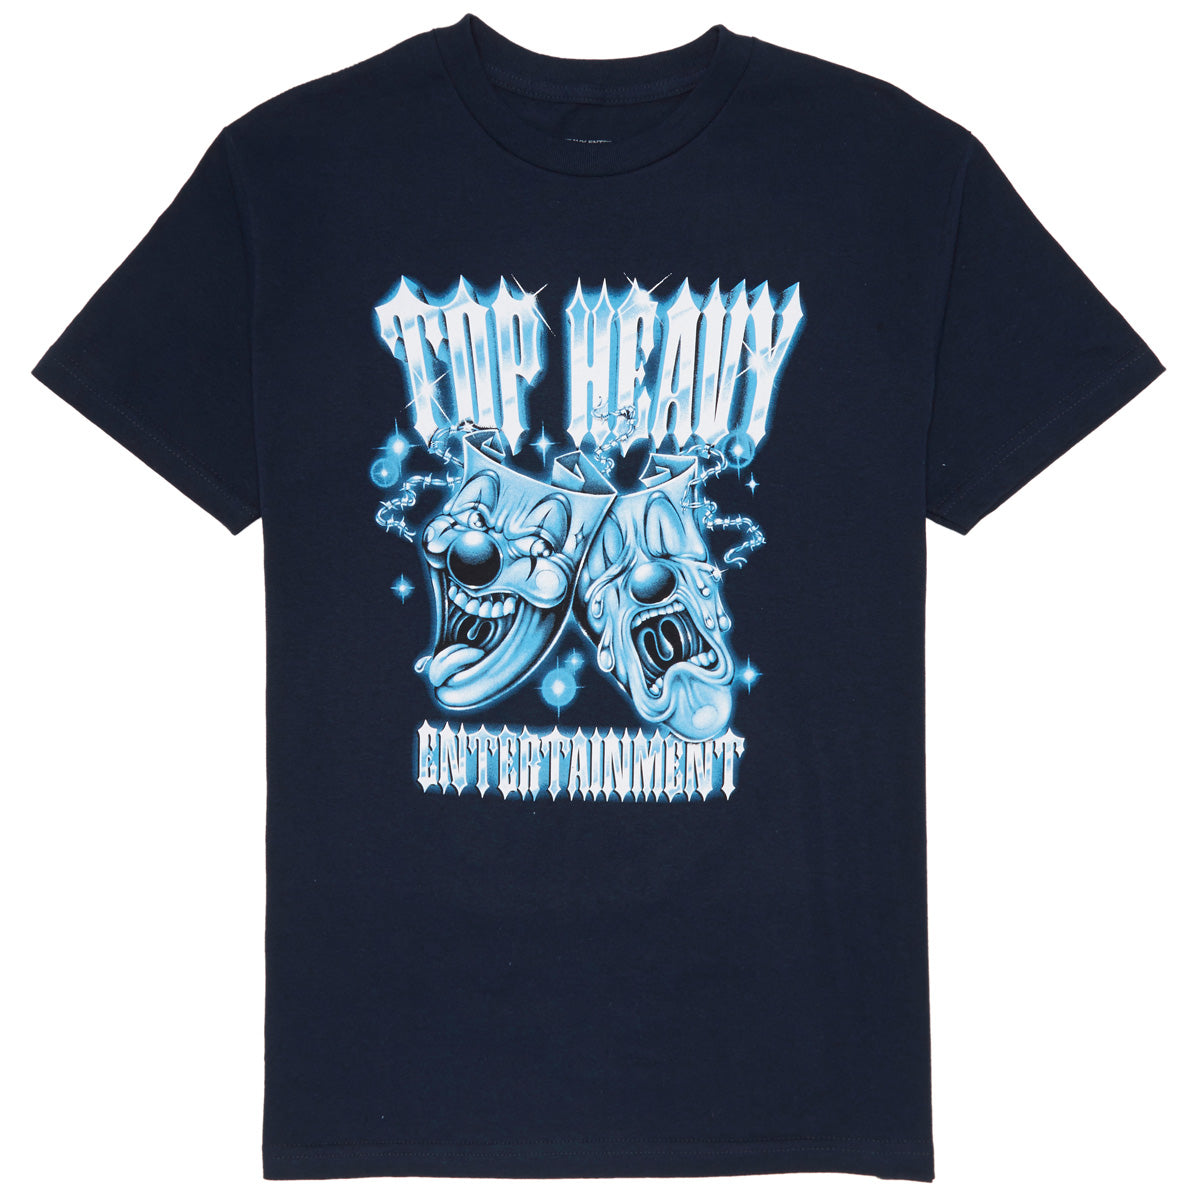 Top Heavy Cry Later T-Shirt - Navy image 1